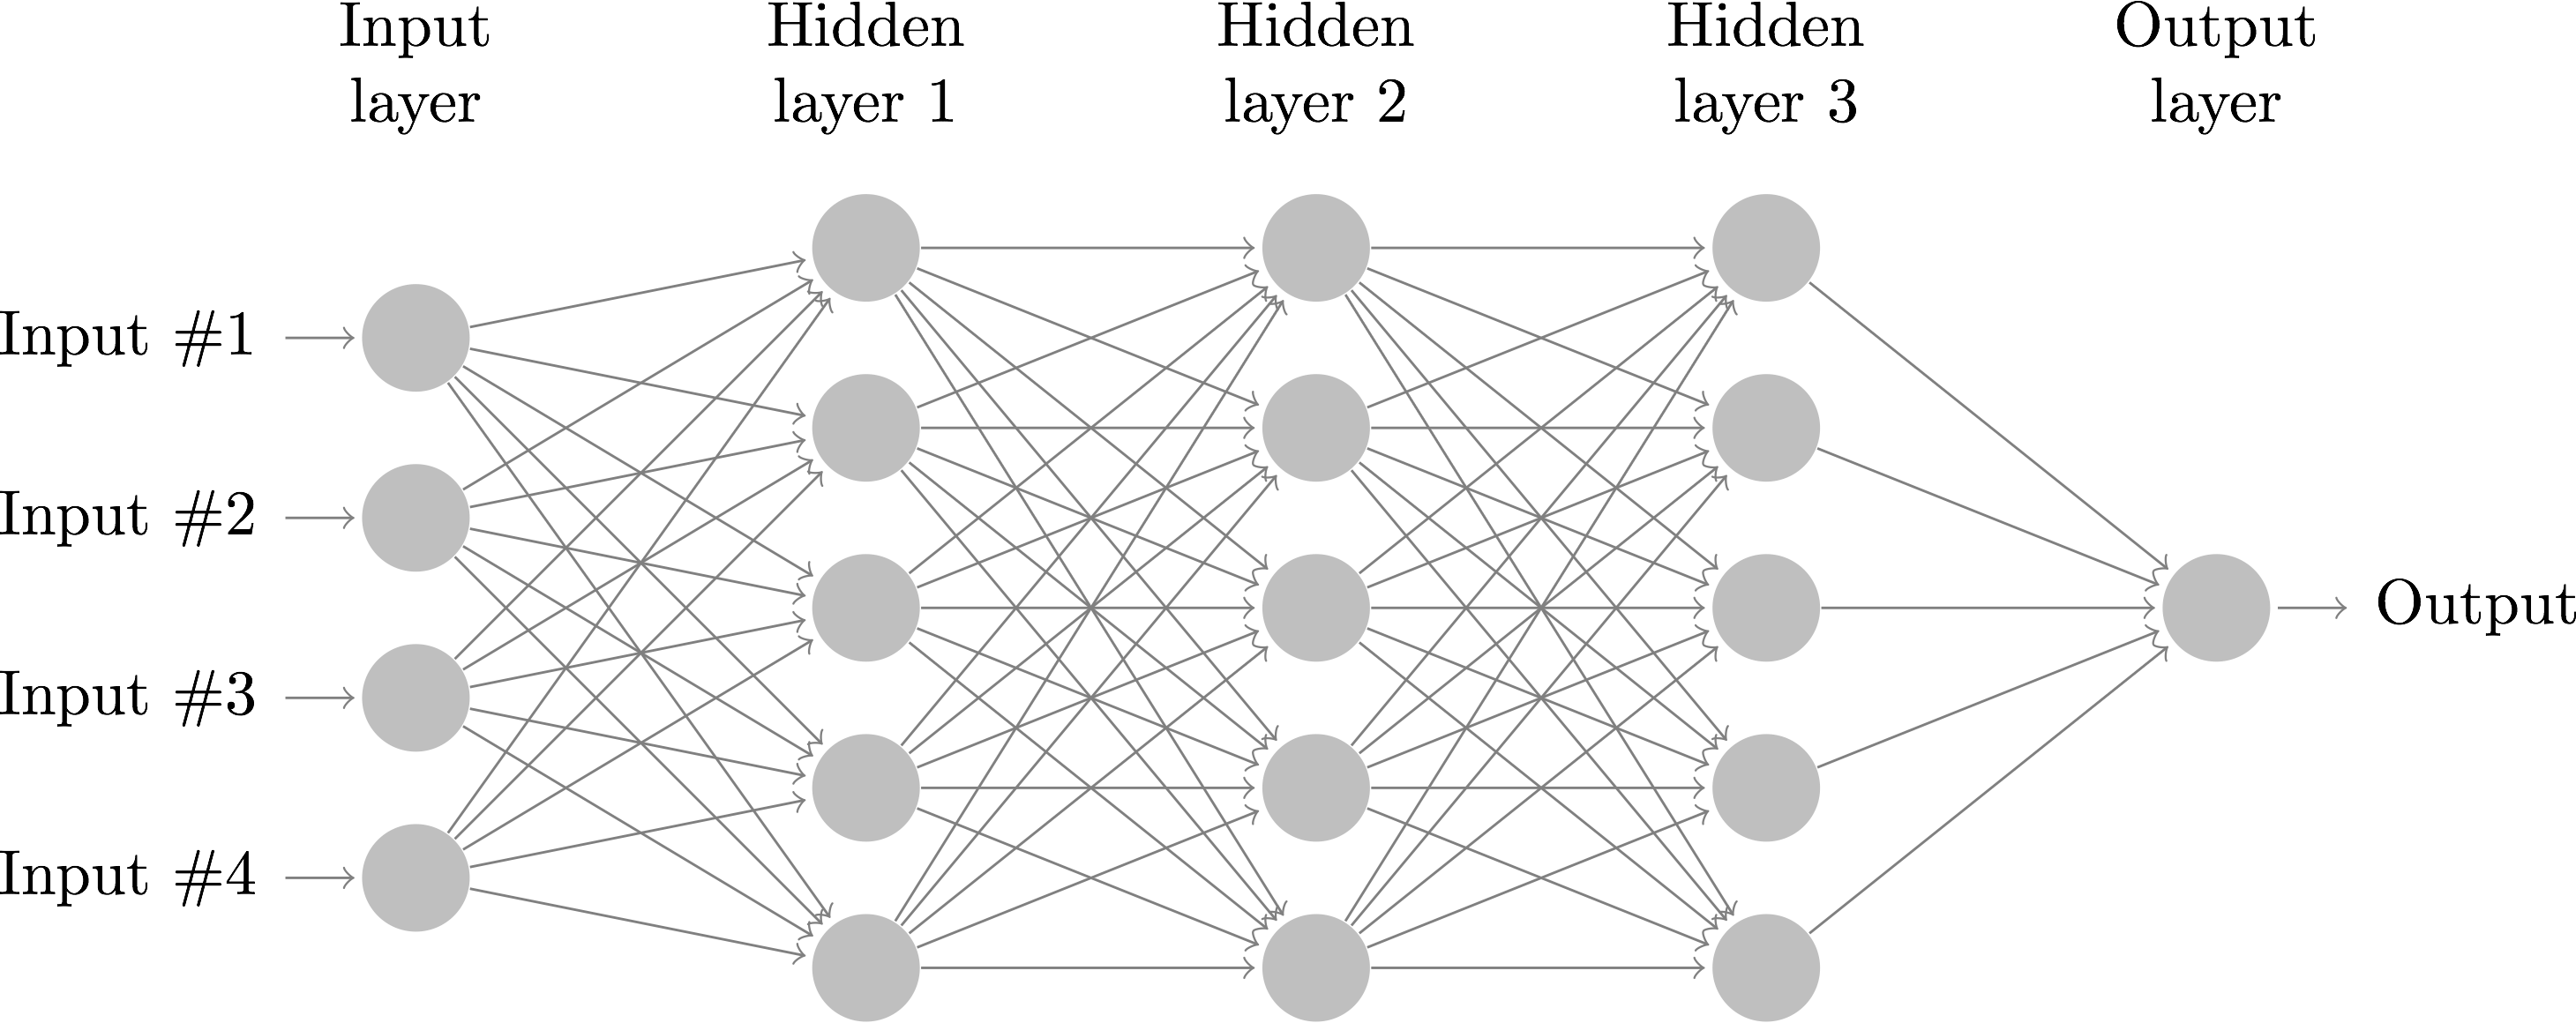 Image result for neural network  7 output layer